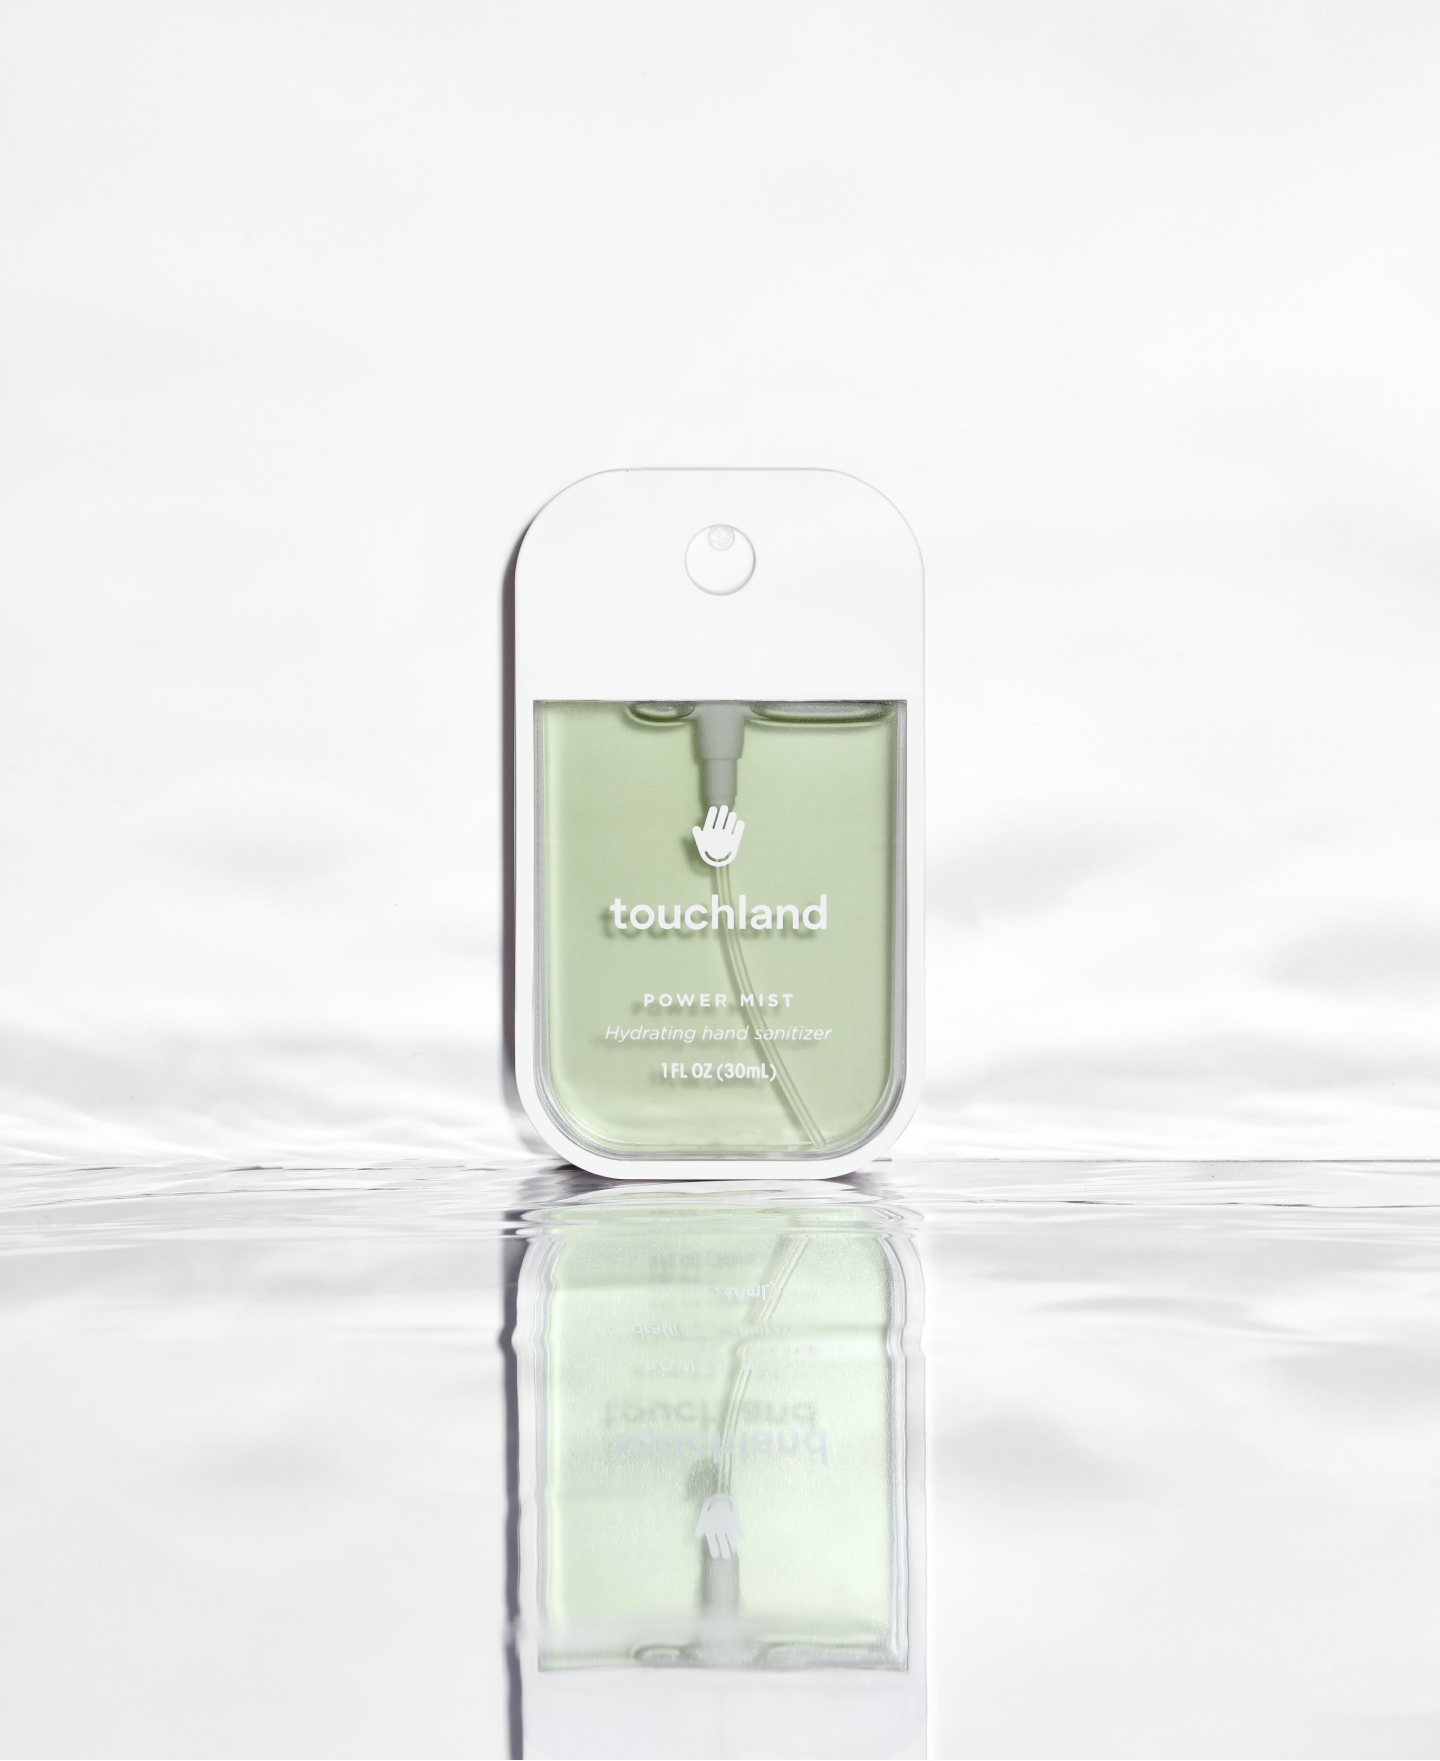 Frontal Power Mist hand sanitizer bottle picture standing on a mirror base with water.